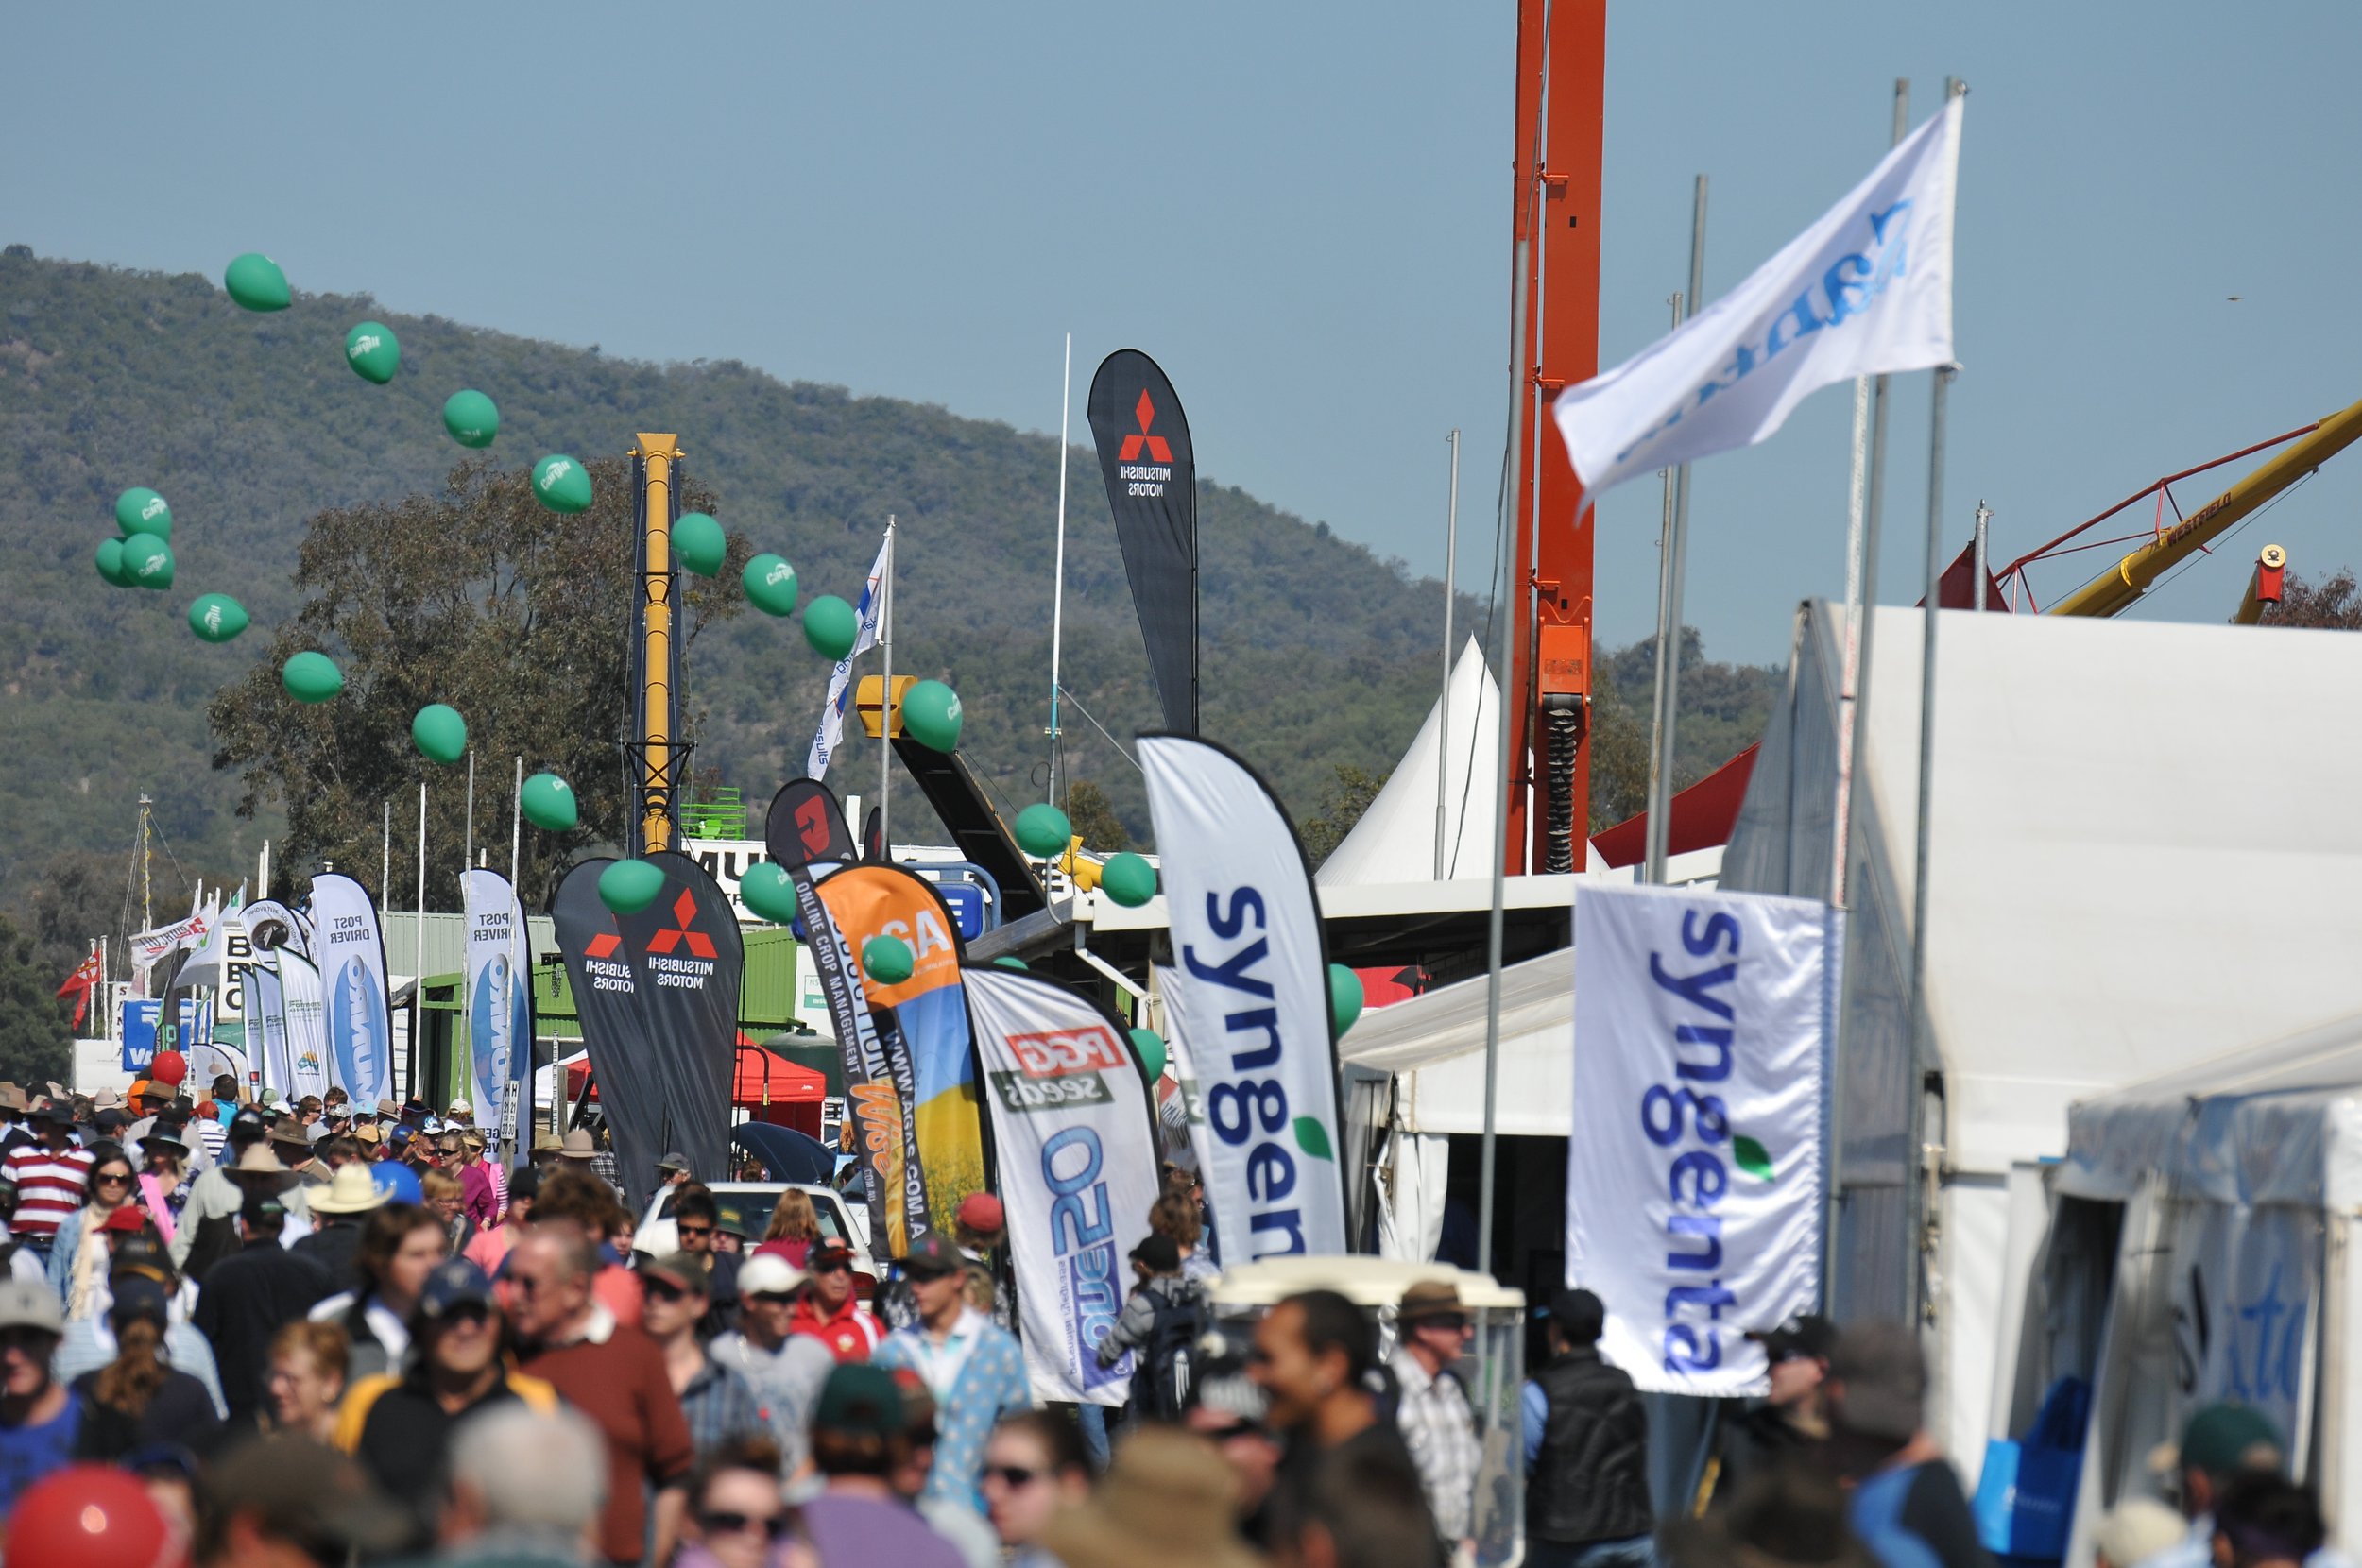   AgQuip Tickets  Event tickets are not yet on sale. 